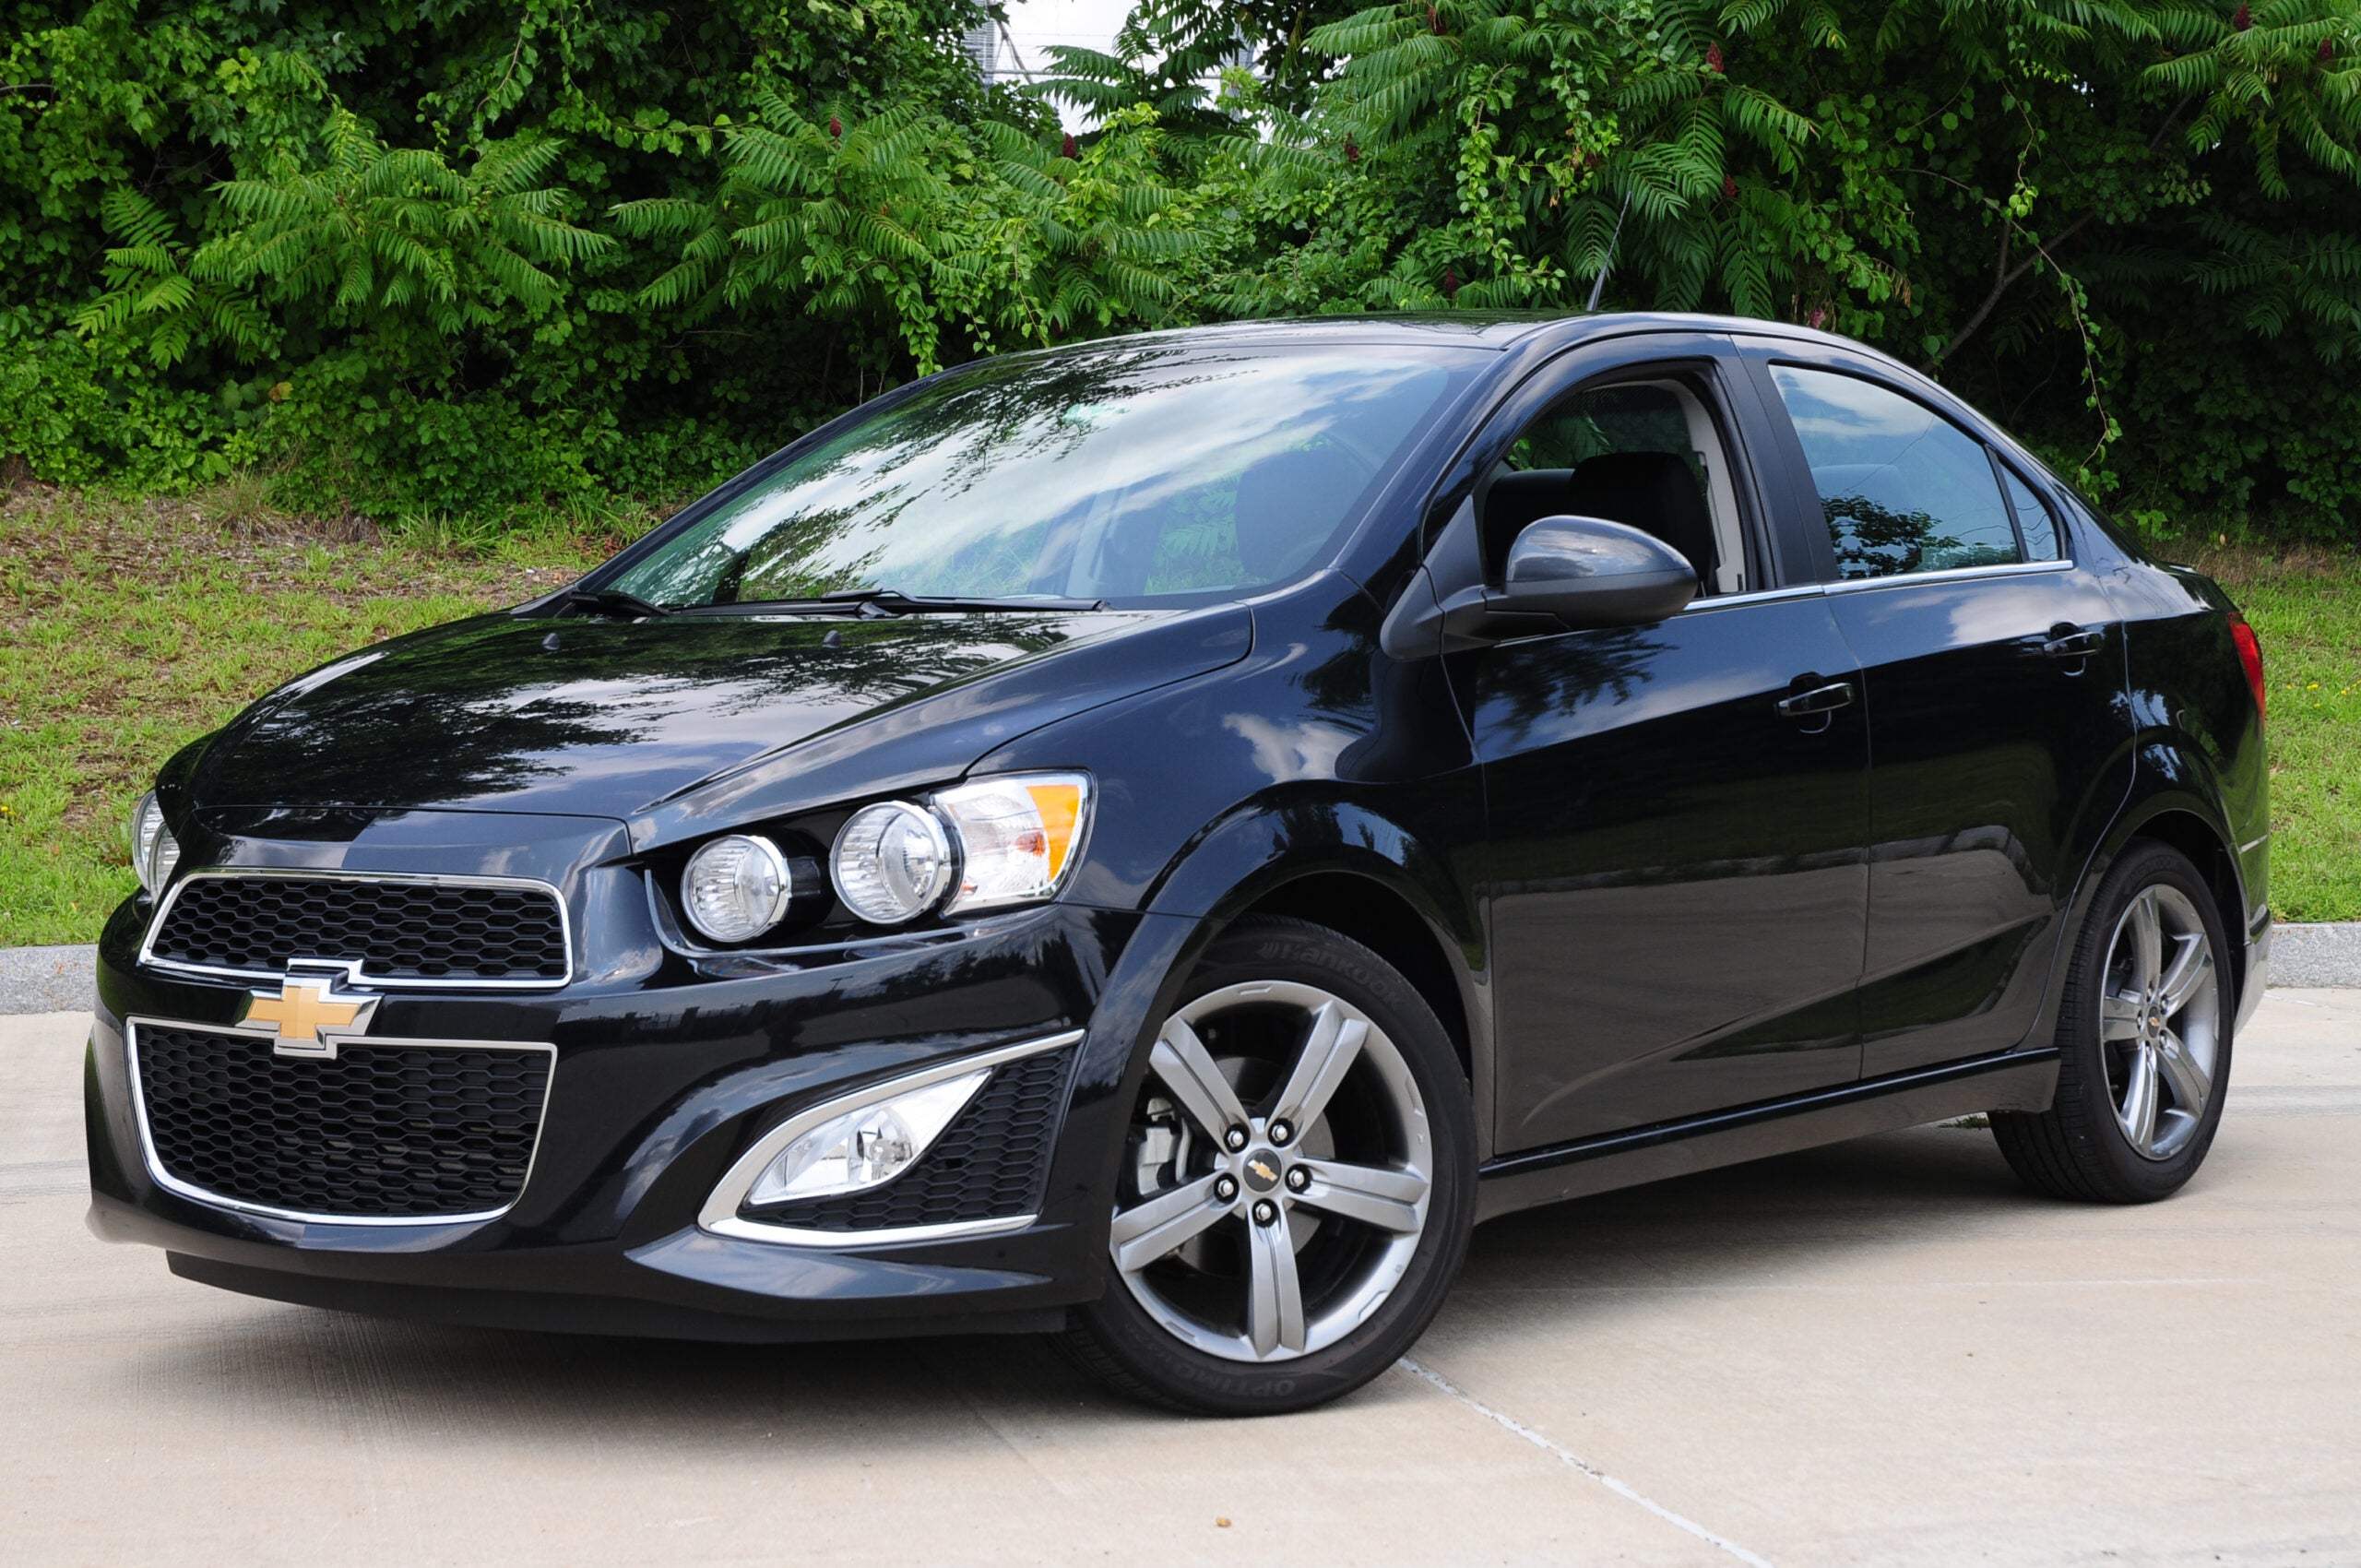 Chevy's Sonic RS Muscles Its Way into Sports Car Market